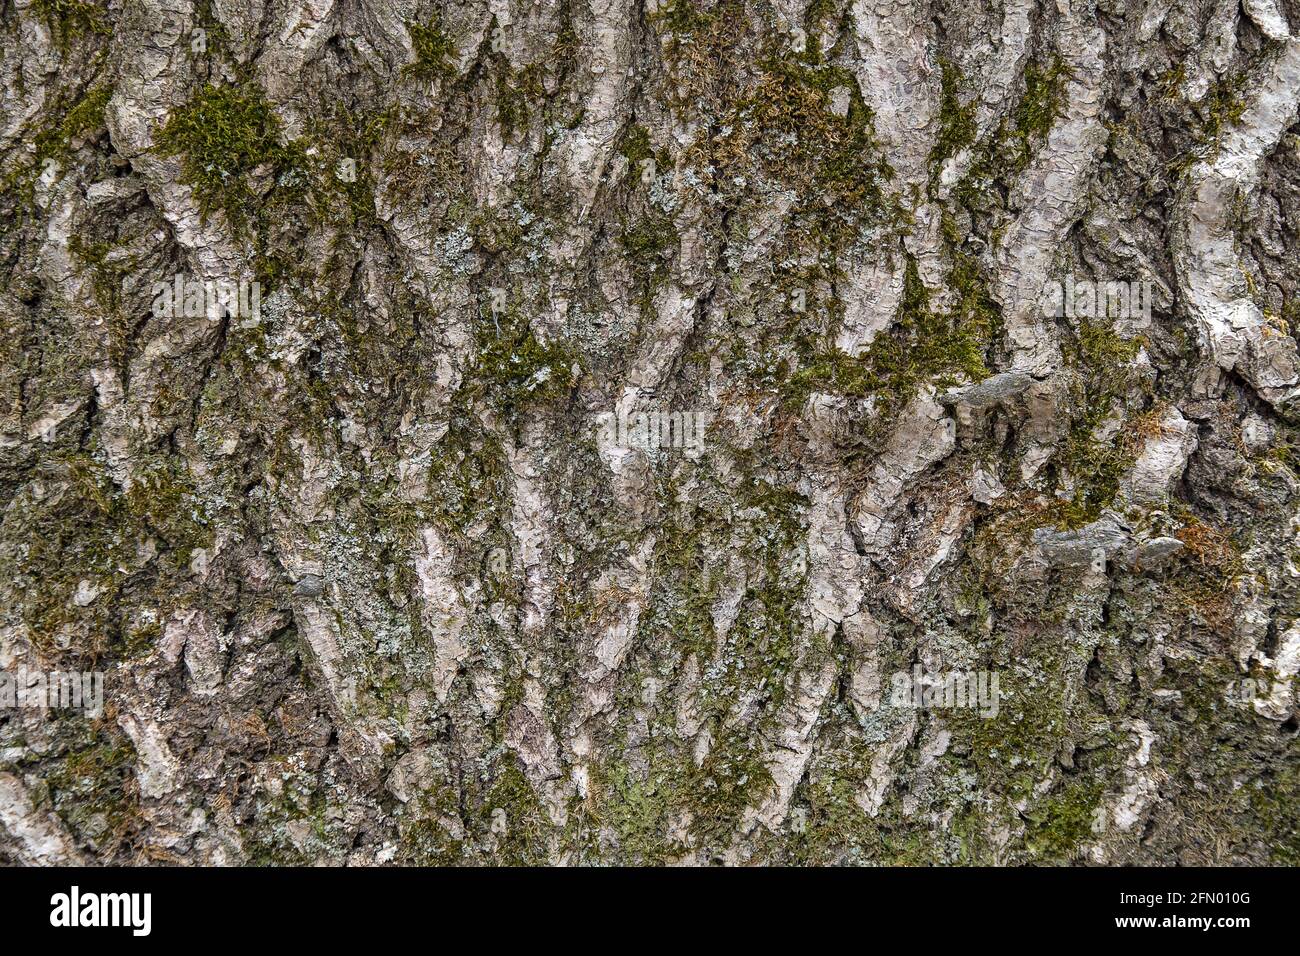 close up of rough tree bark with green moss Stock Photo